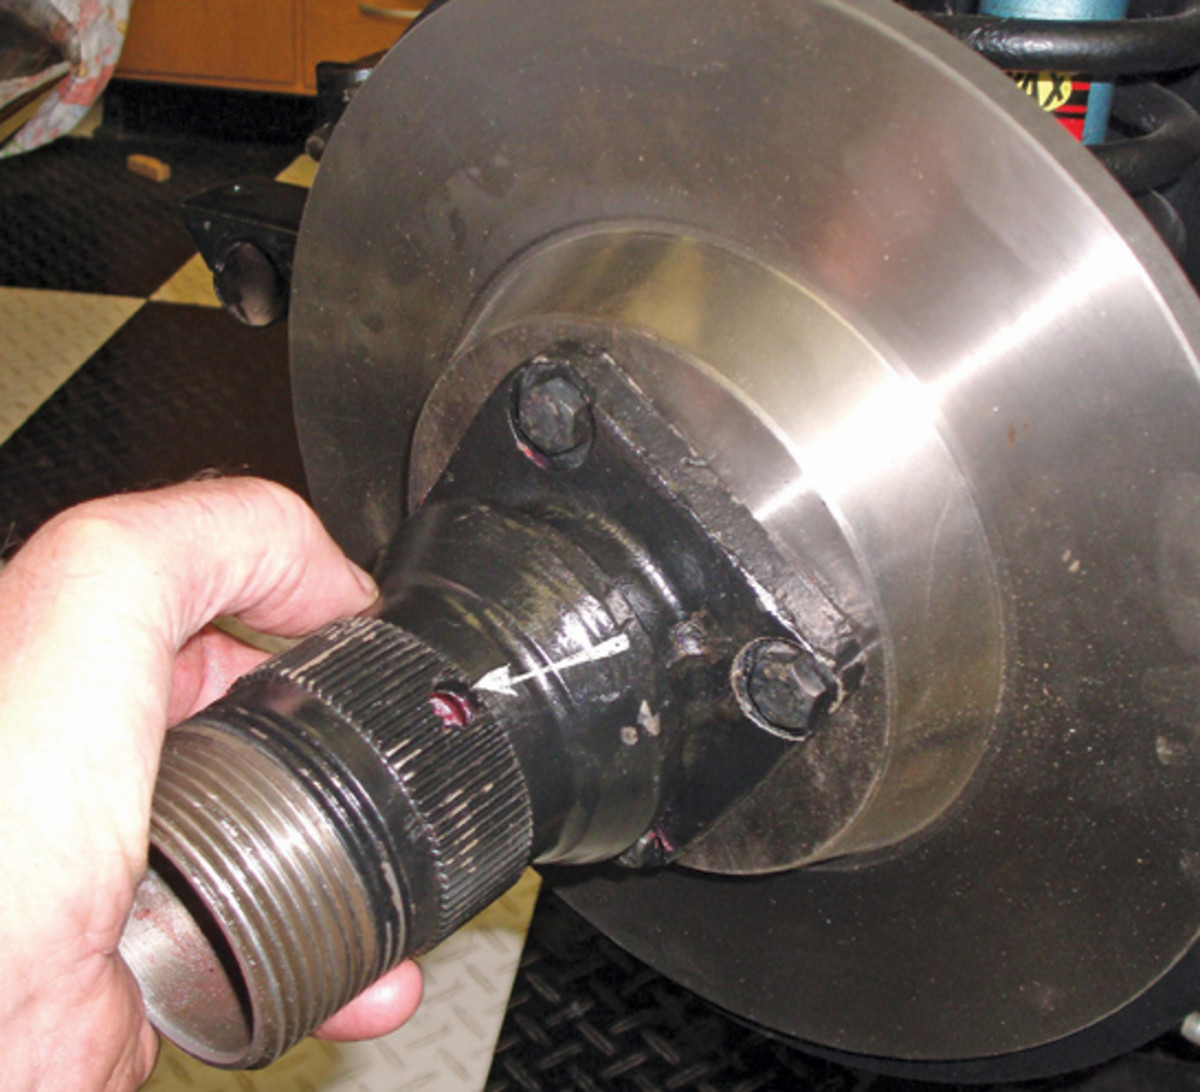 With all bearings, felt seals, dust covers and shields in place, the hub and rotor assembly can be slid onto the stub axle. This may push the small bearing out, but it can be pushed back in. The arrow points to the cotter pin install hole.